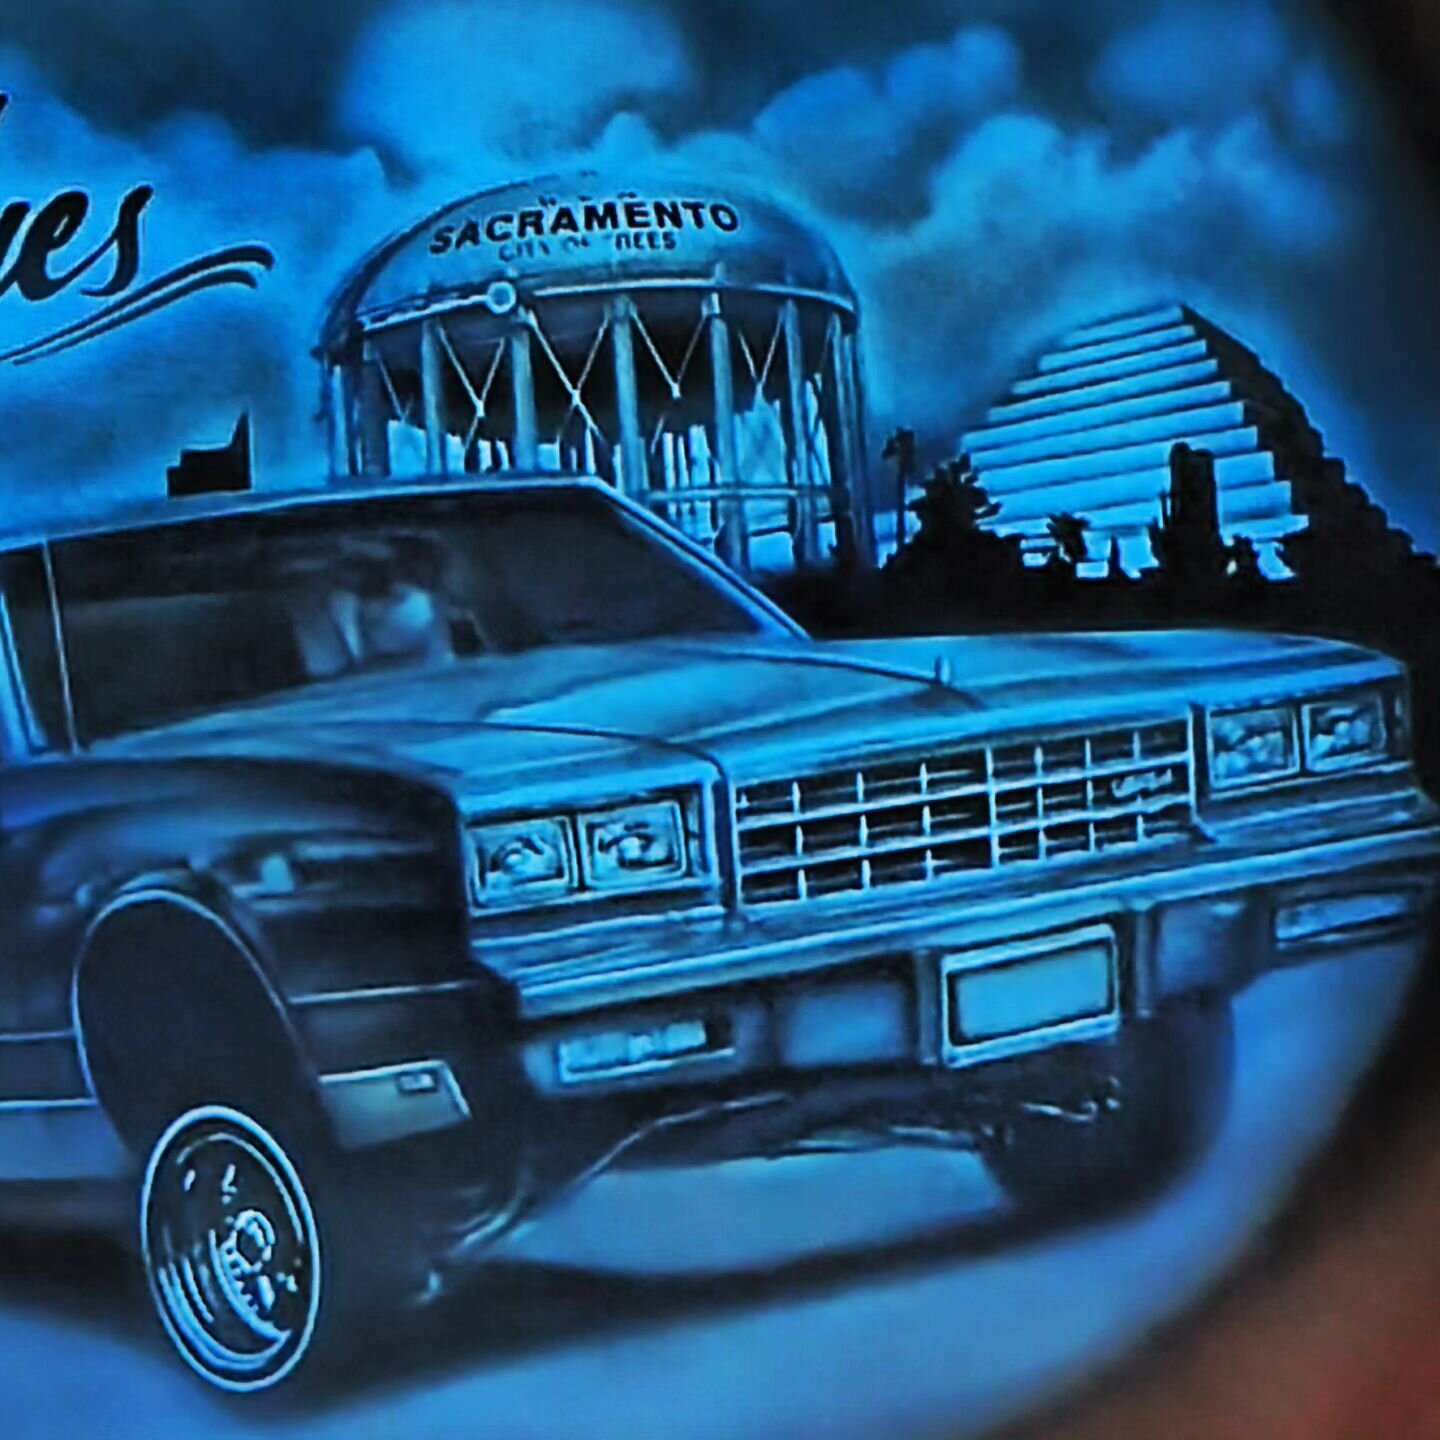 Throwback, airbrushed Monte Carlo firewall mural.

www.sunnytheartist.com 

#mural #lowrider #airbrush #montecarlo #candypaint